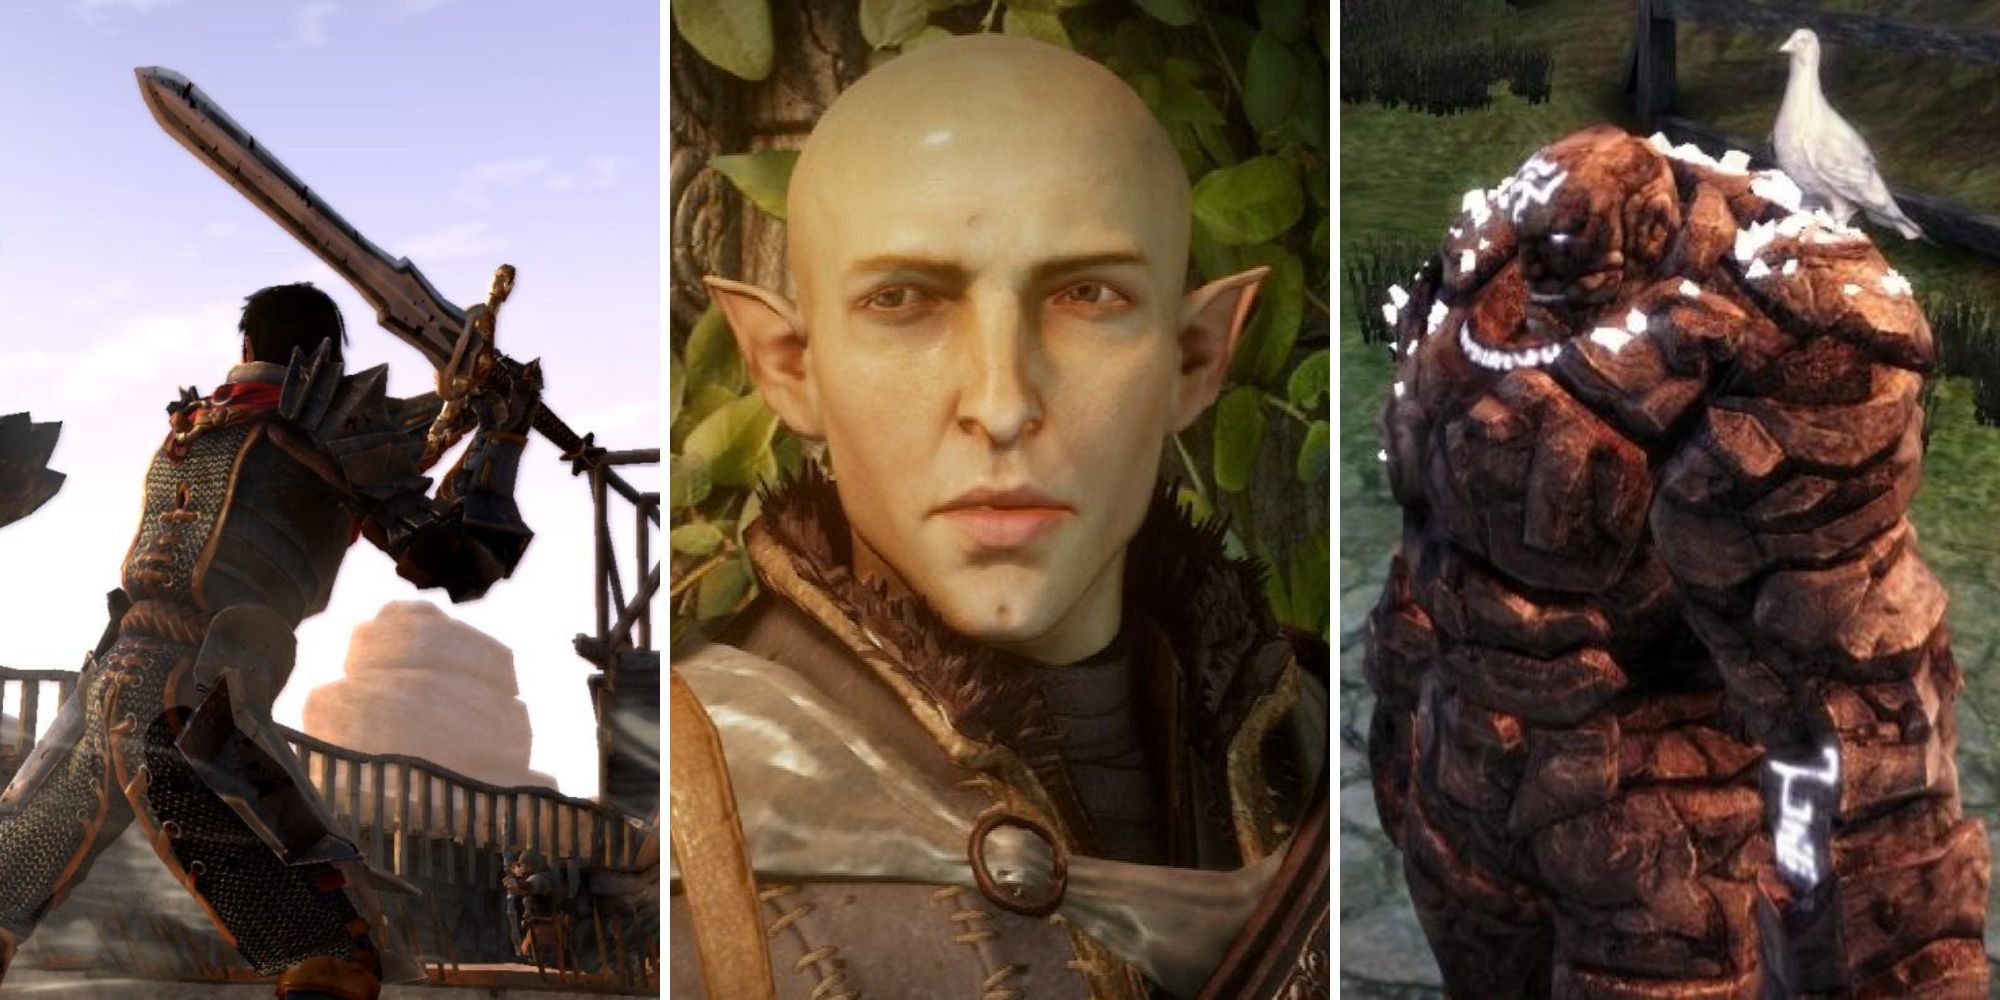 A grid showing the three games in the order of Dragon Age 2, Dragon Age Inquisition, and Dragon Age Origins 